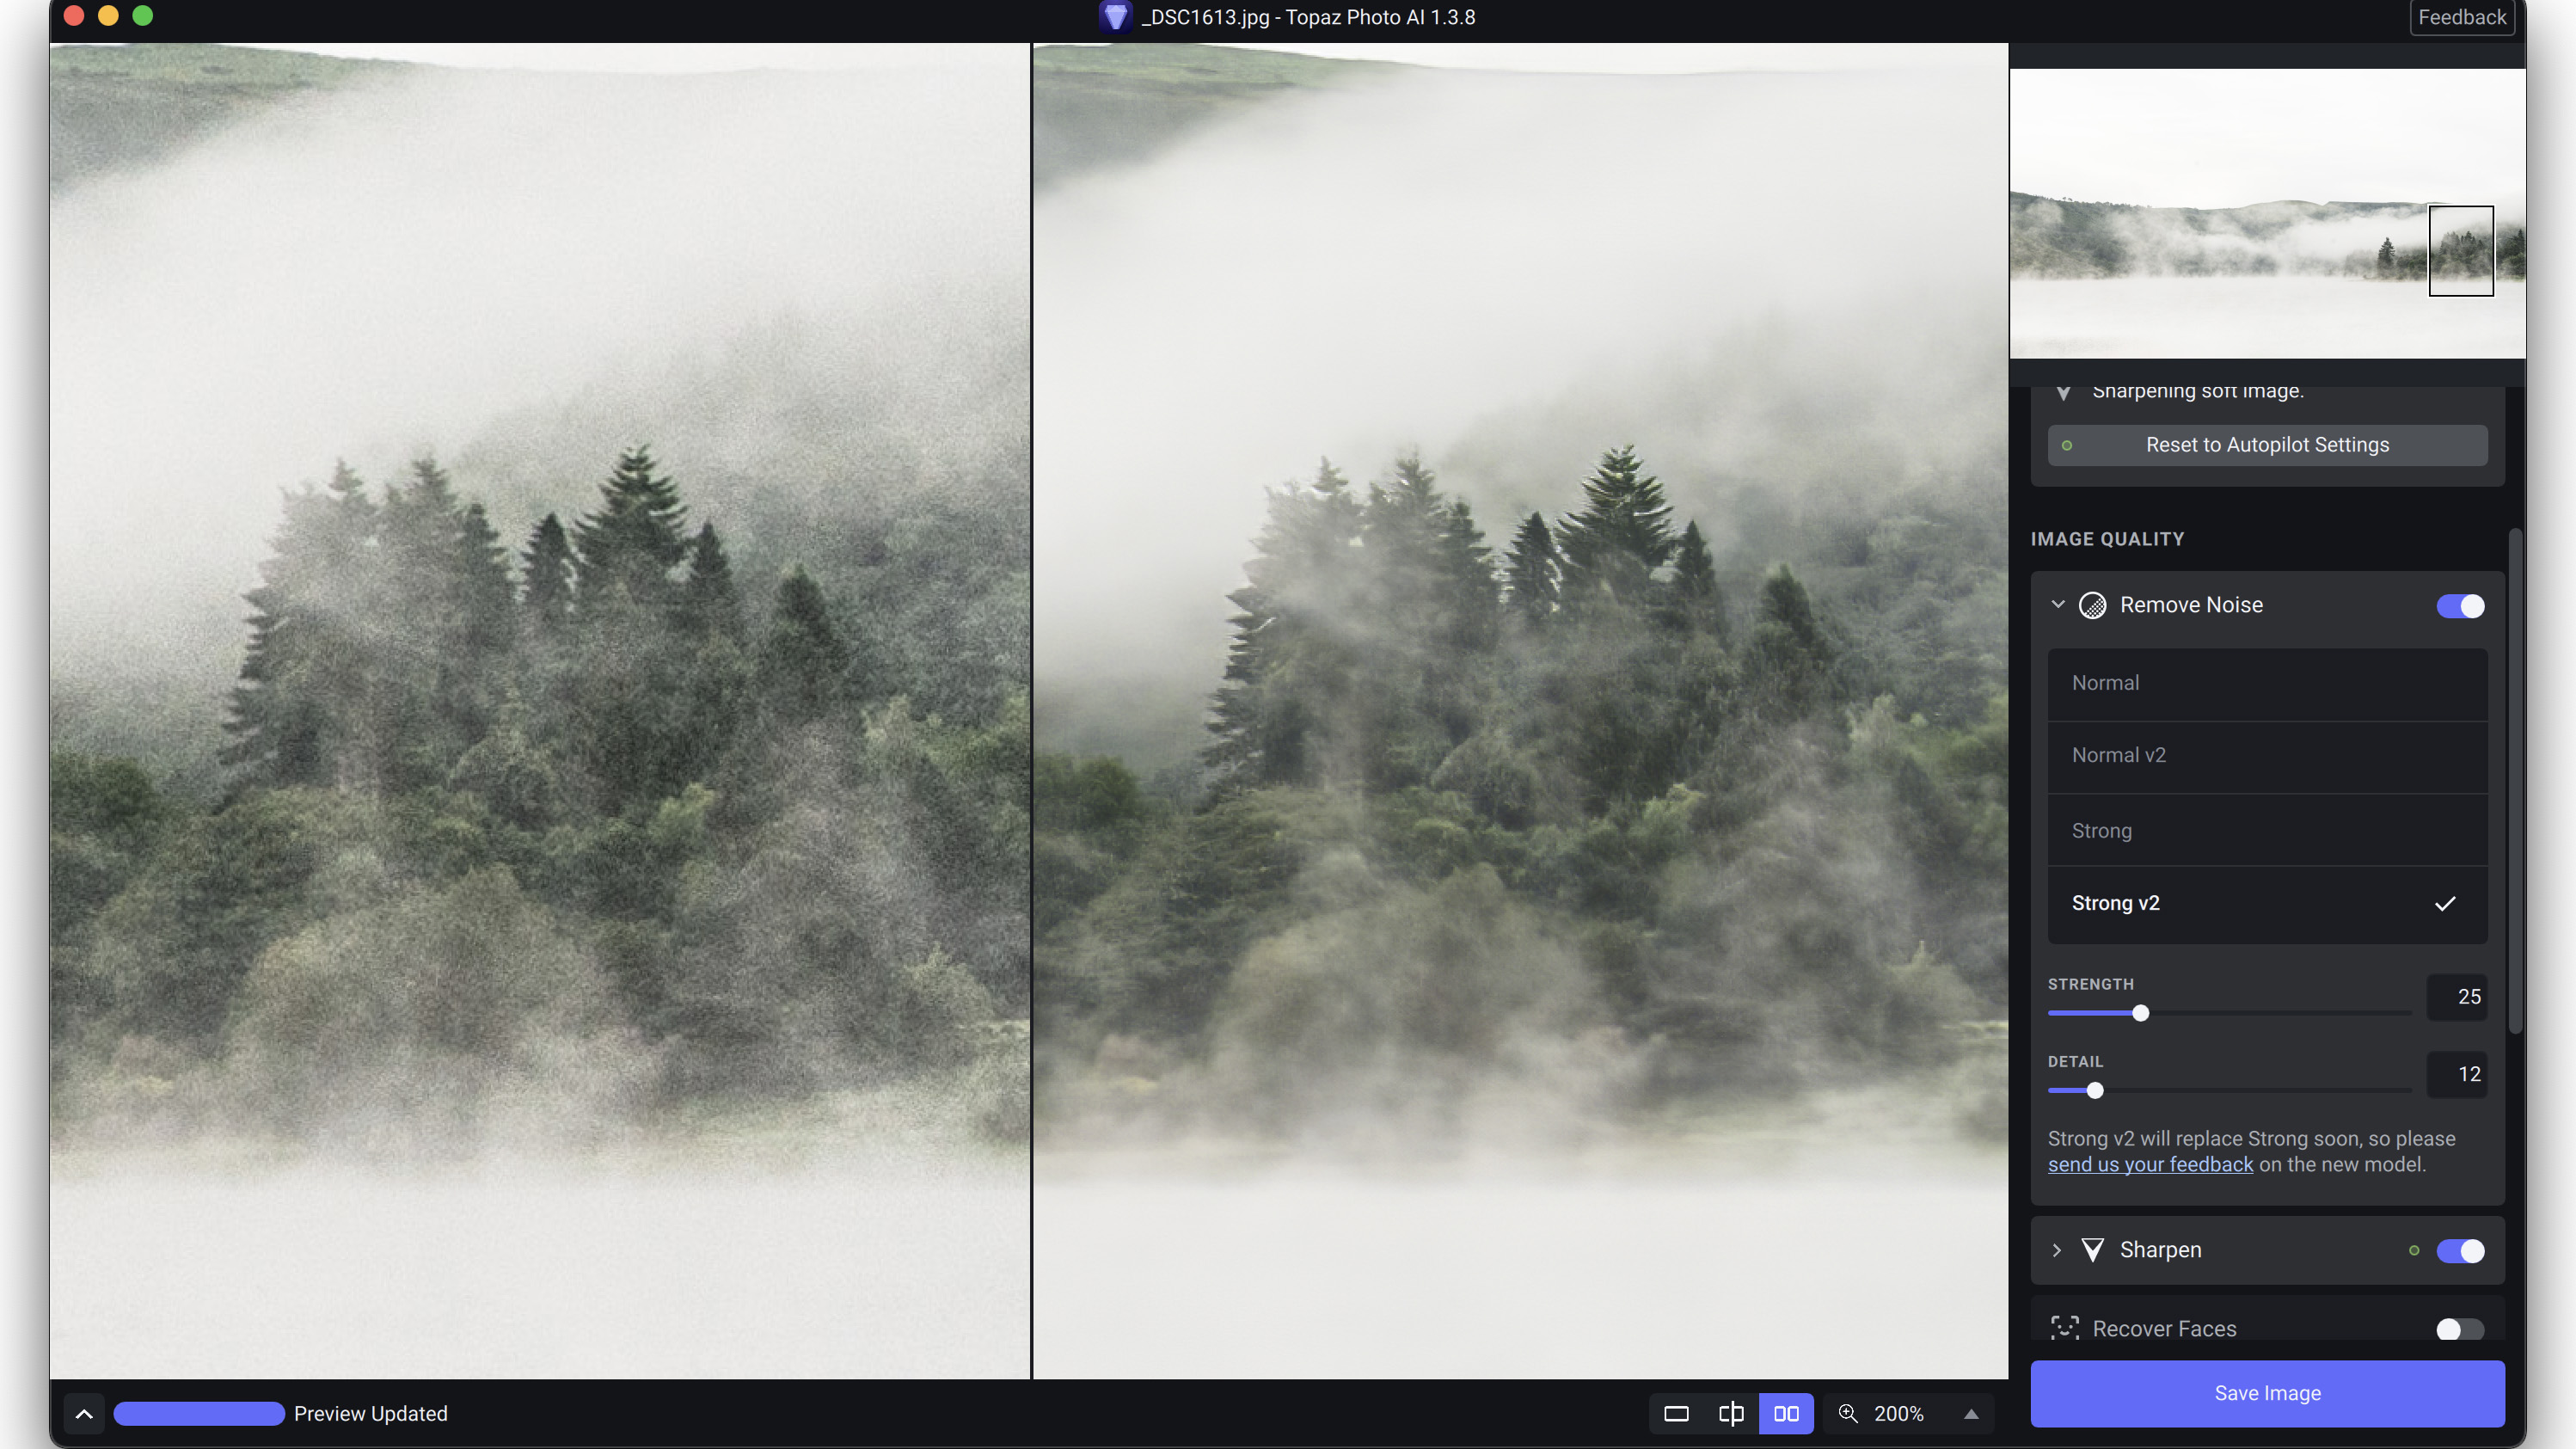 Topaz Photo AI editor screenshot before and after noise reduction applied to image of misty woodland